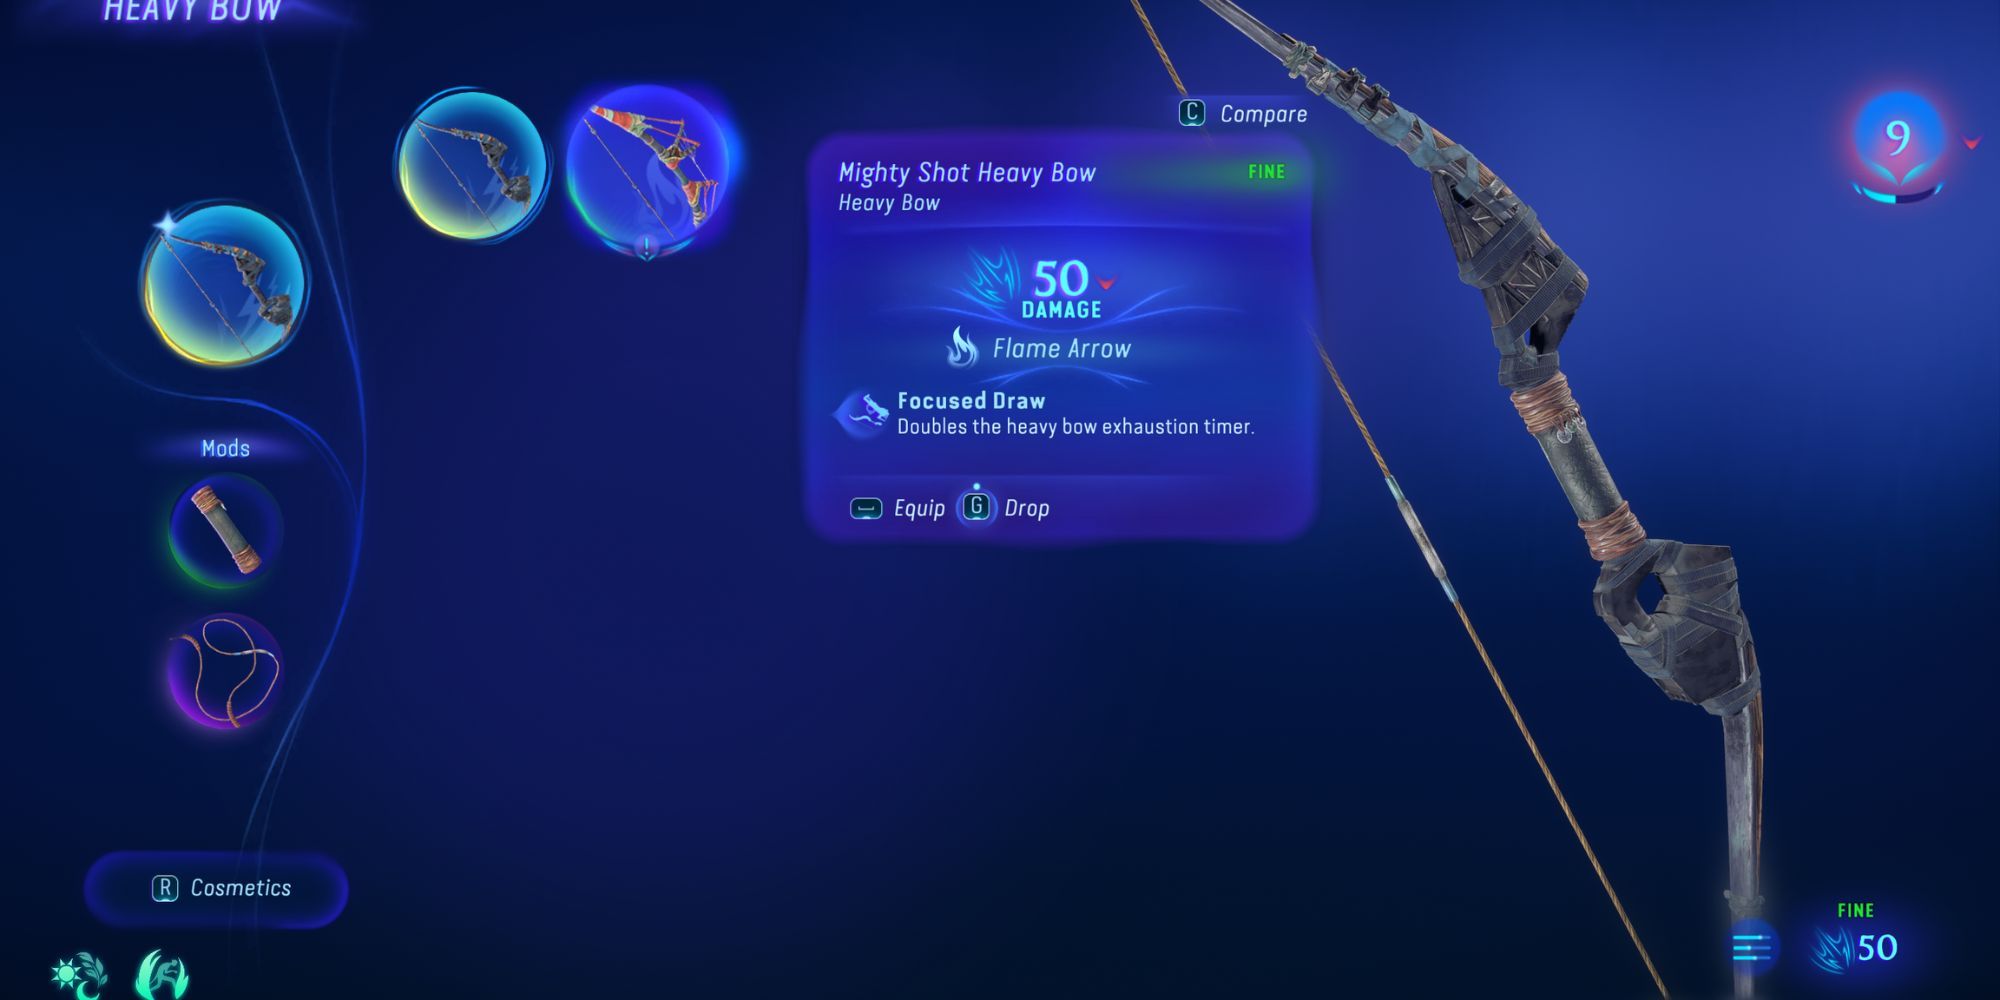 The Mighty Shot Heavy Bow in the player's inventory